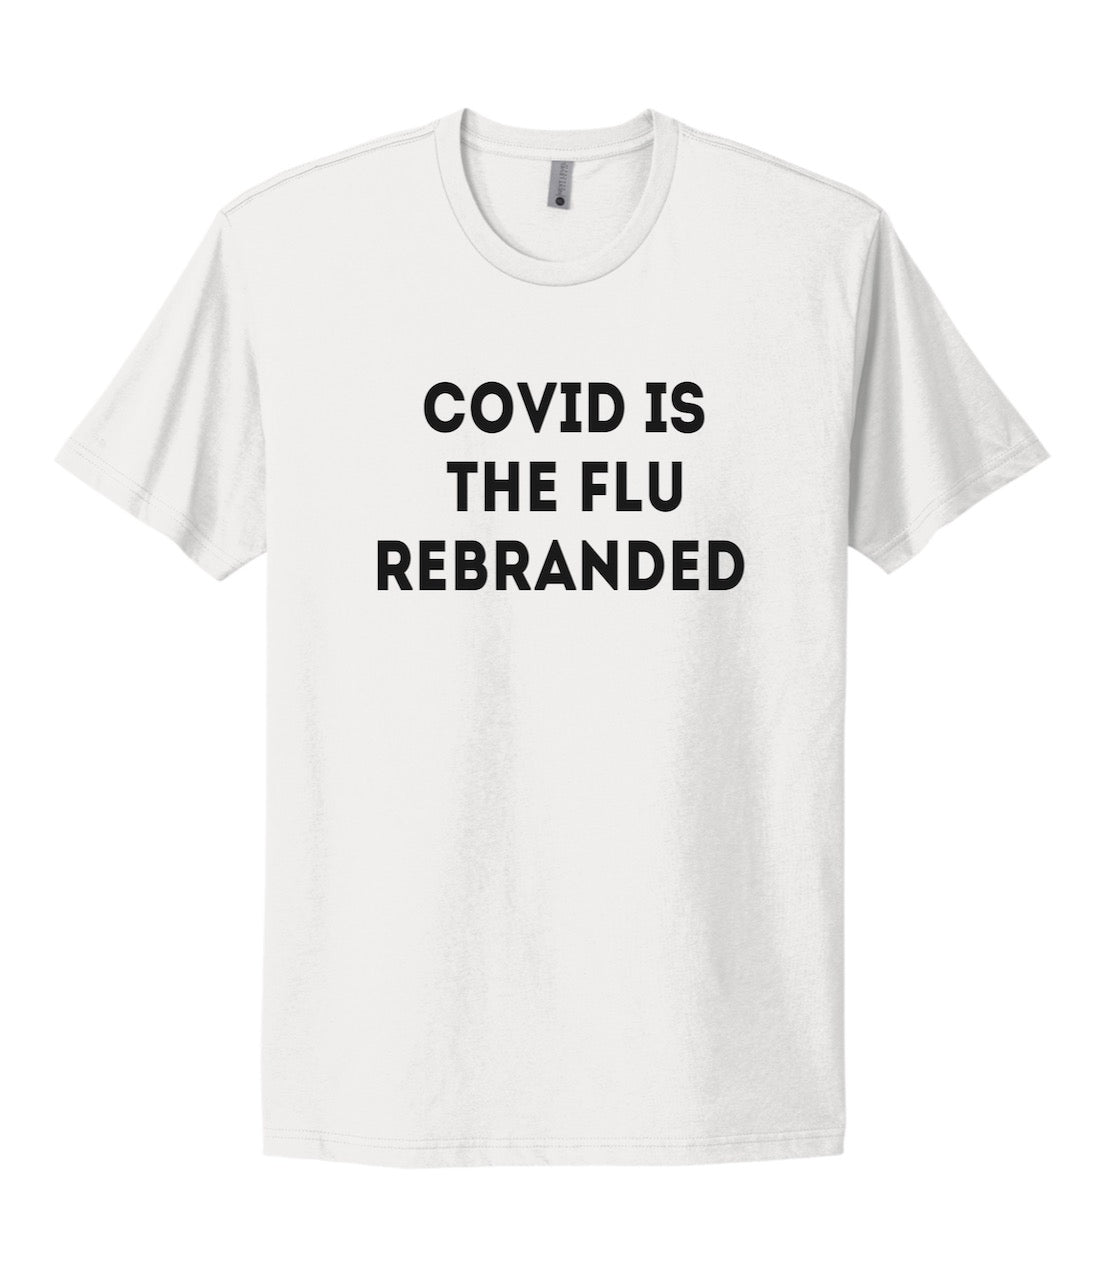 COVID IS THE FLU REBRANDED t-shirt